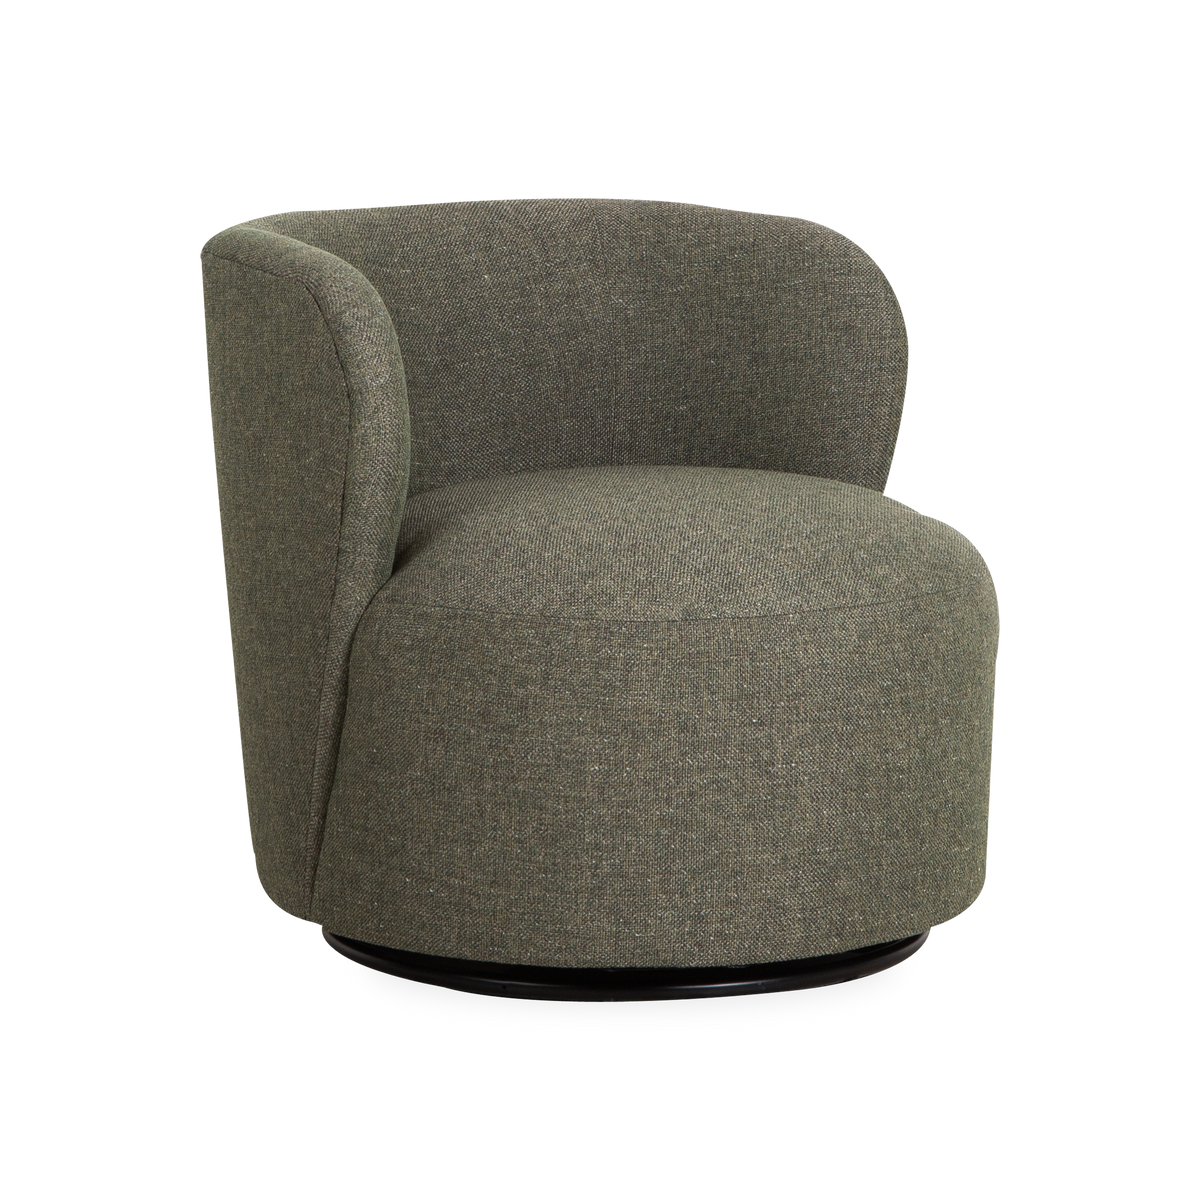 A great option for smaller spaces, the Fairbank Chair flaunts an effortlessly comfortable look.